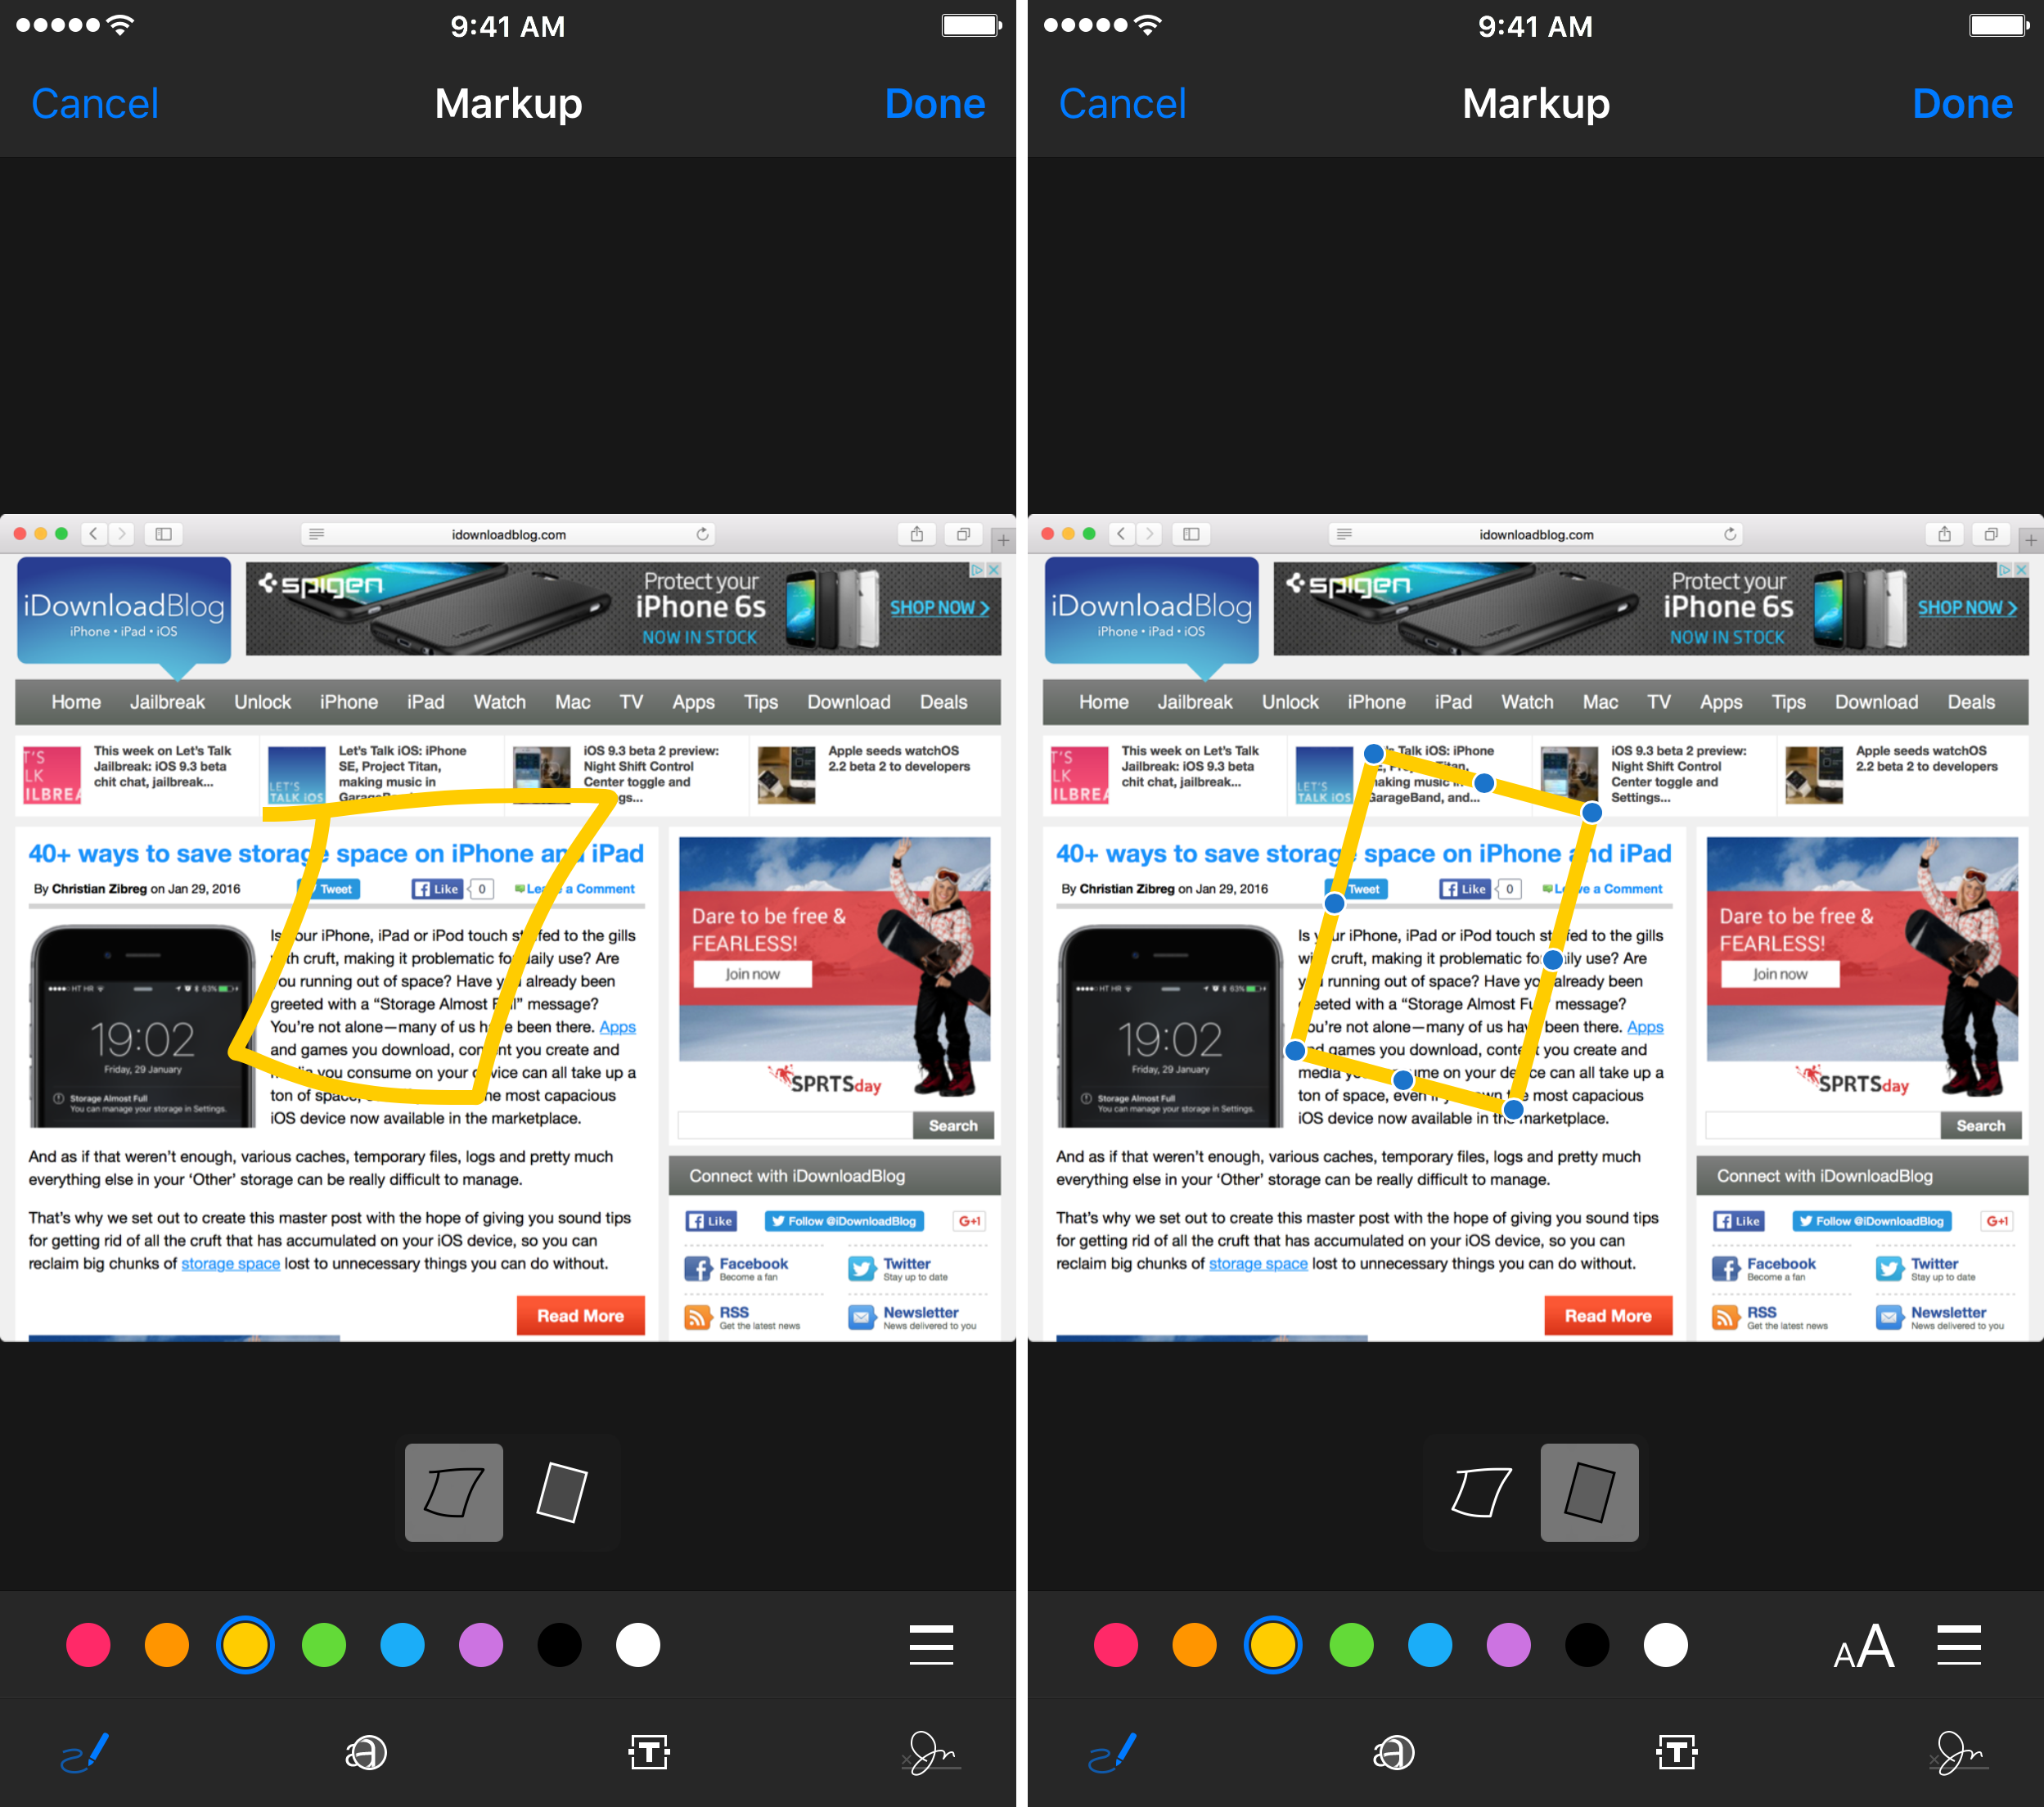 how to markup in mail for iOS draw shapes suggestions